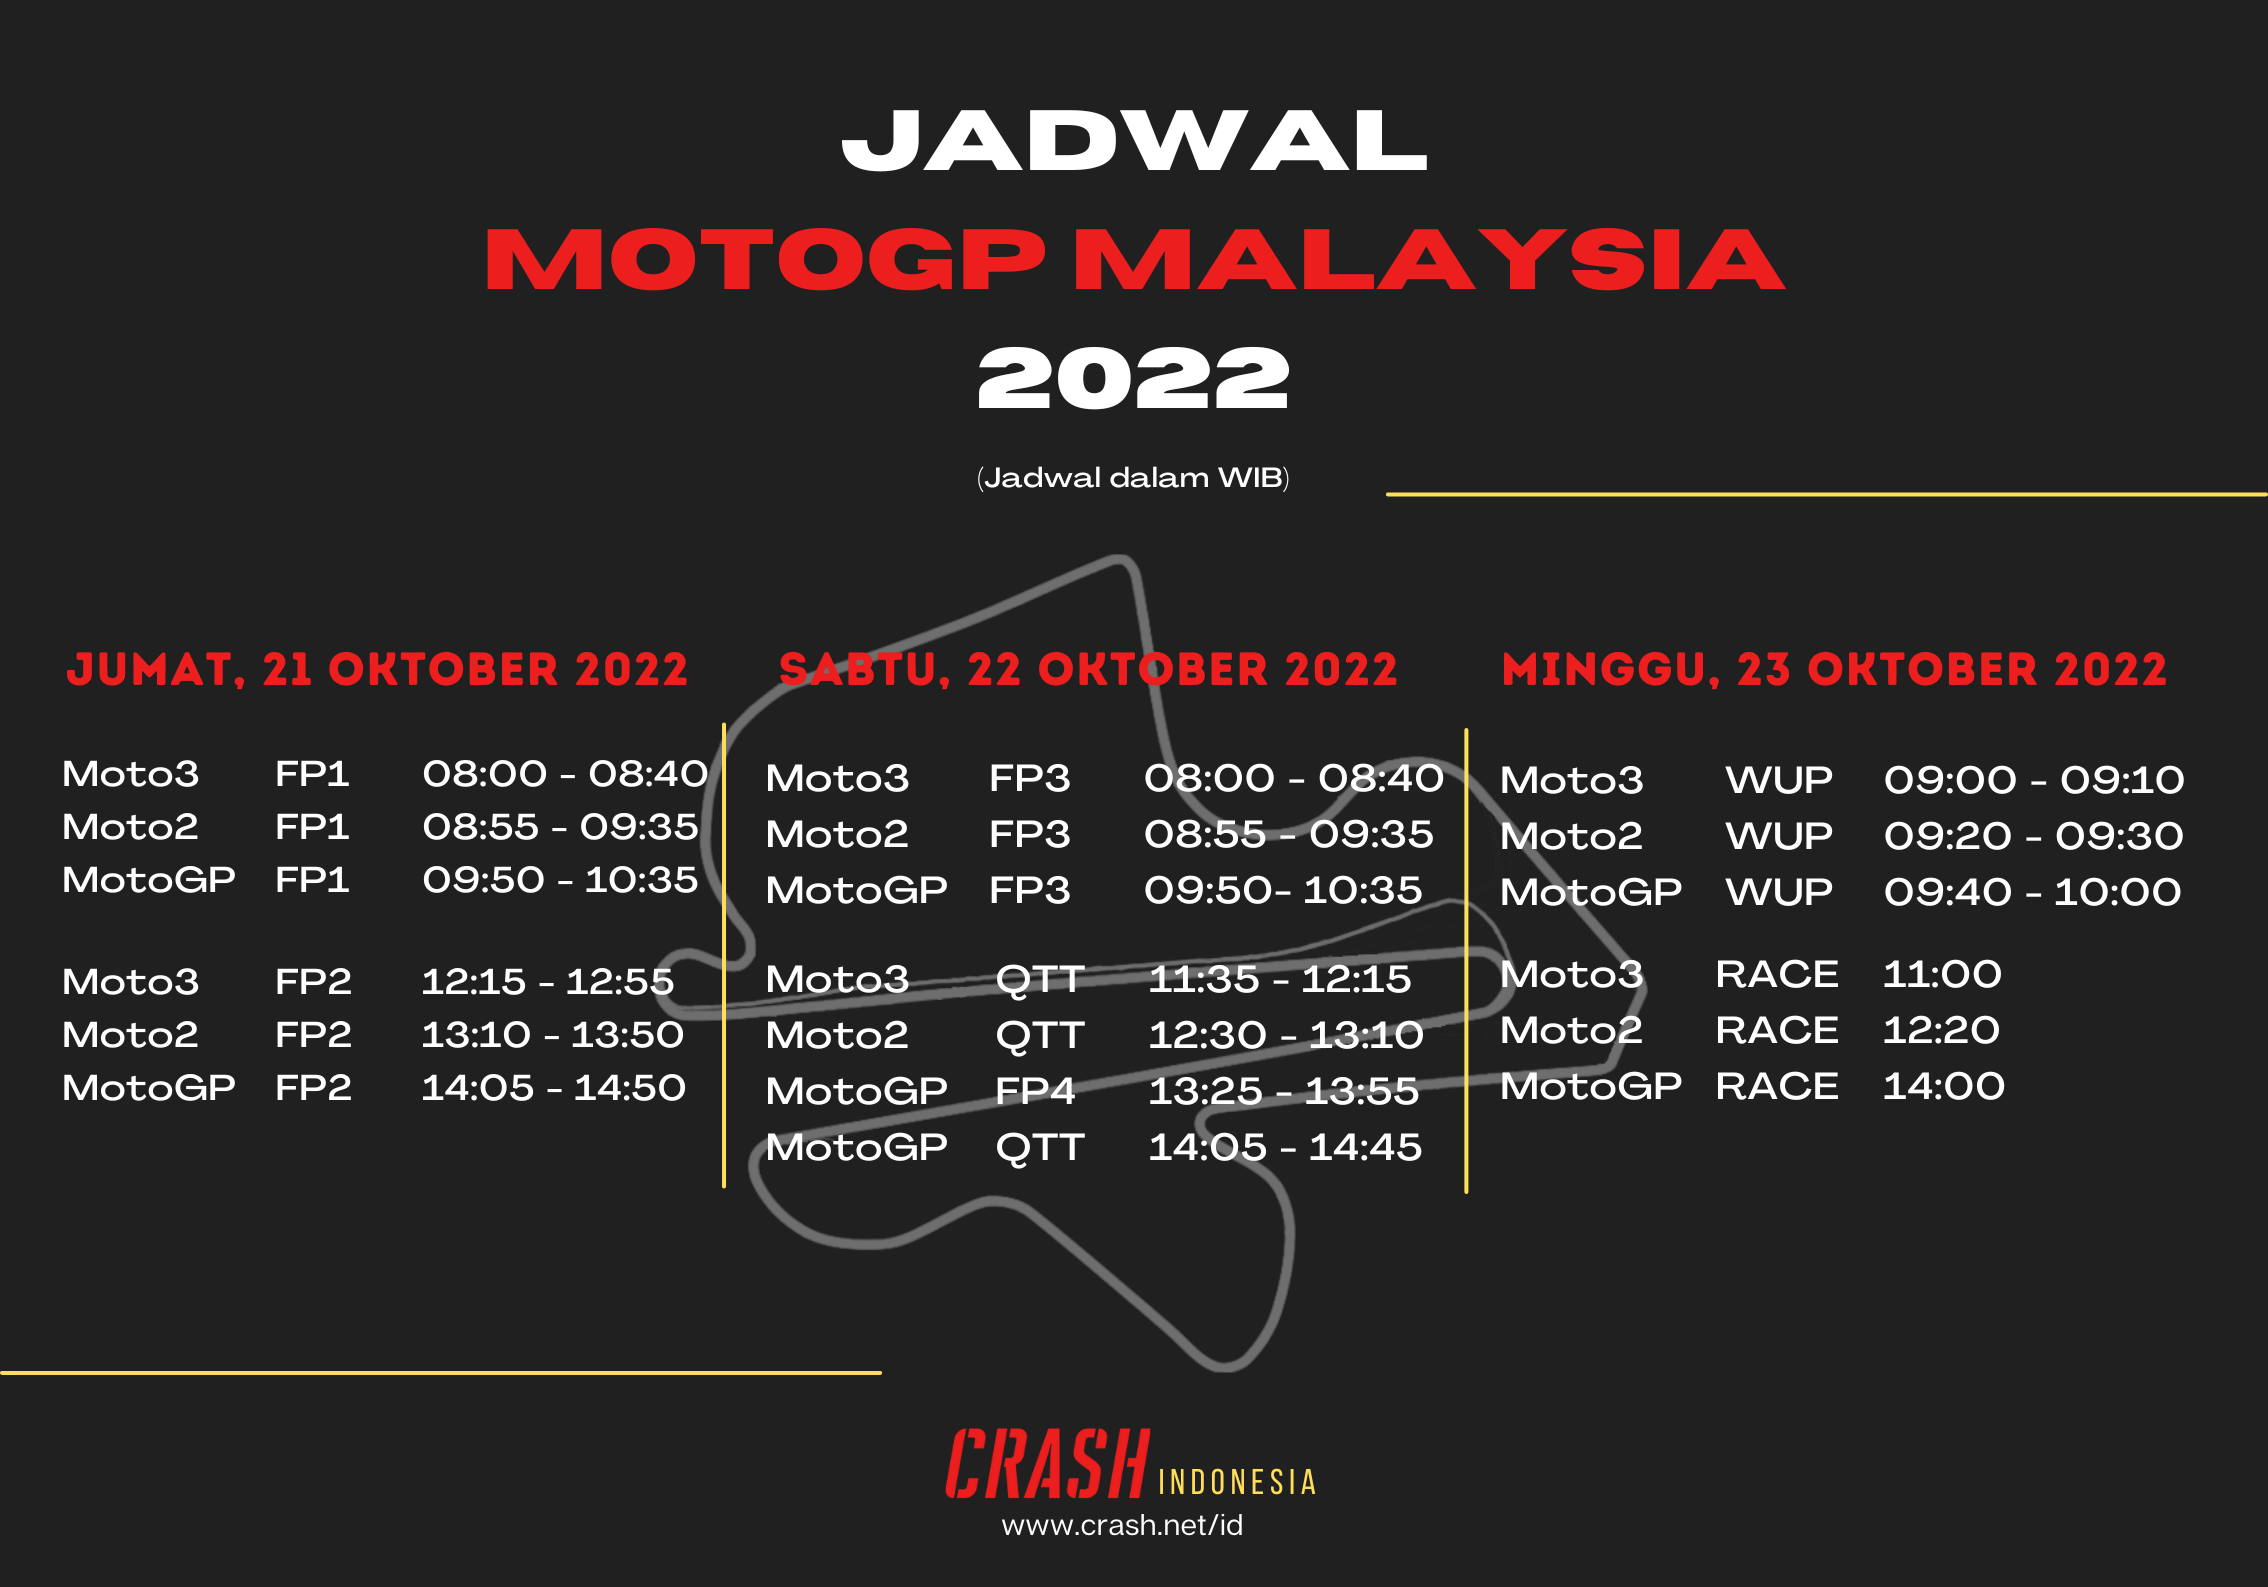 Malaysian MotoGP Schedule in Western Indonesian Time